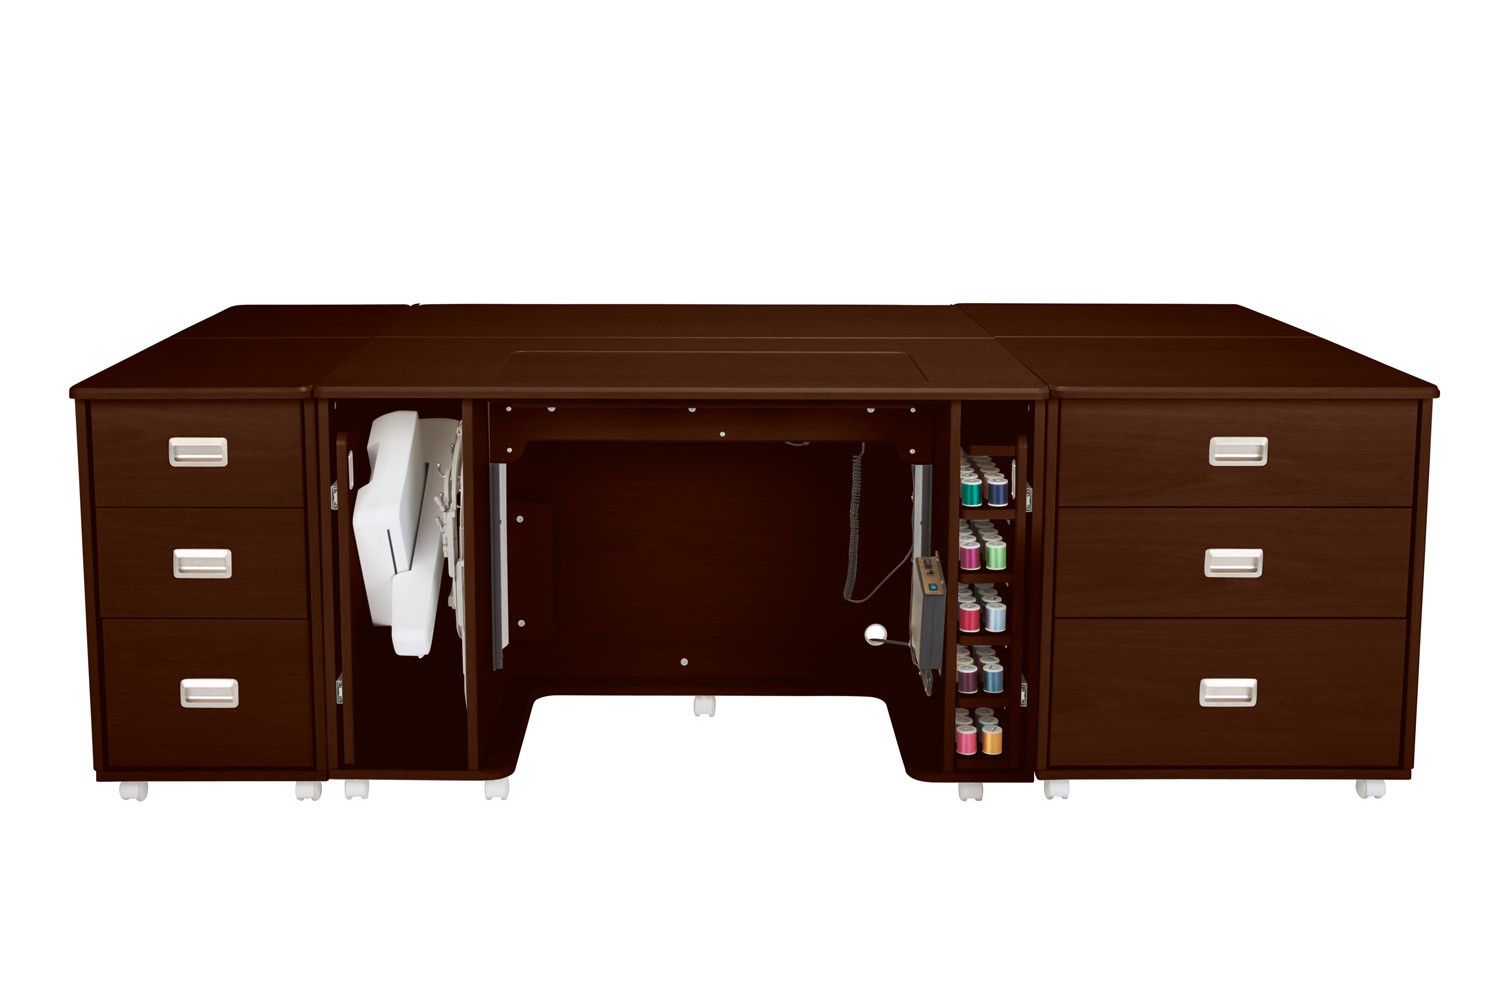 EmbroideryCenter_CP_KOEC+drawers_BrazilianCherry